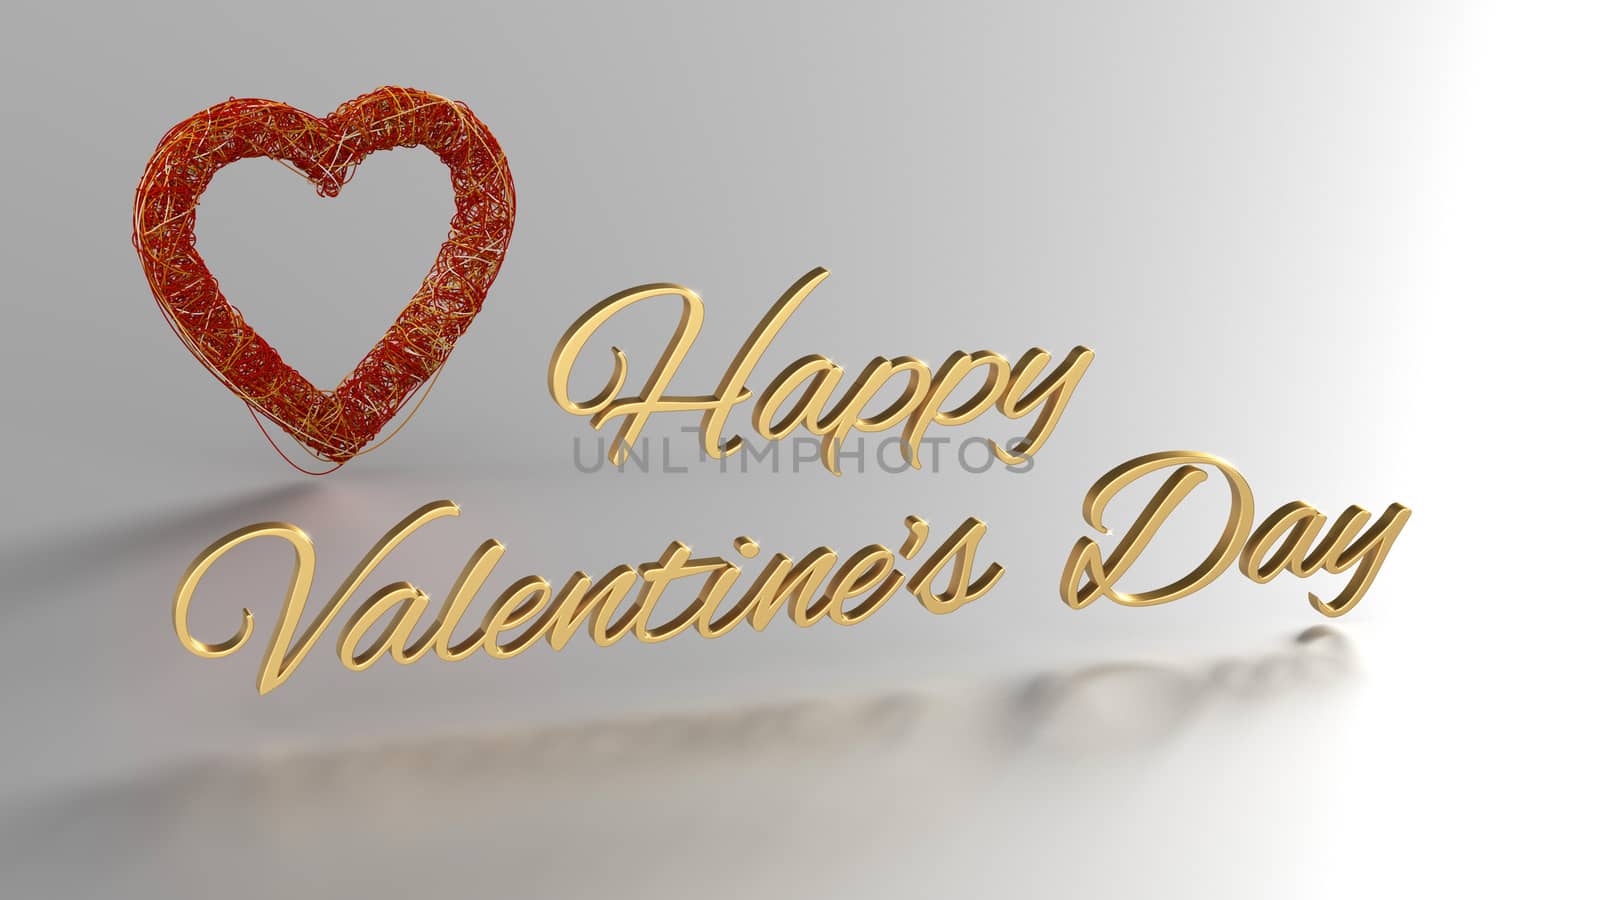 Happy Valentines Day 3D Render with gold text and red heart at background